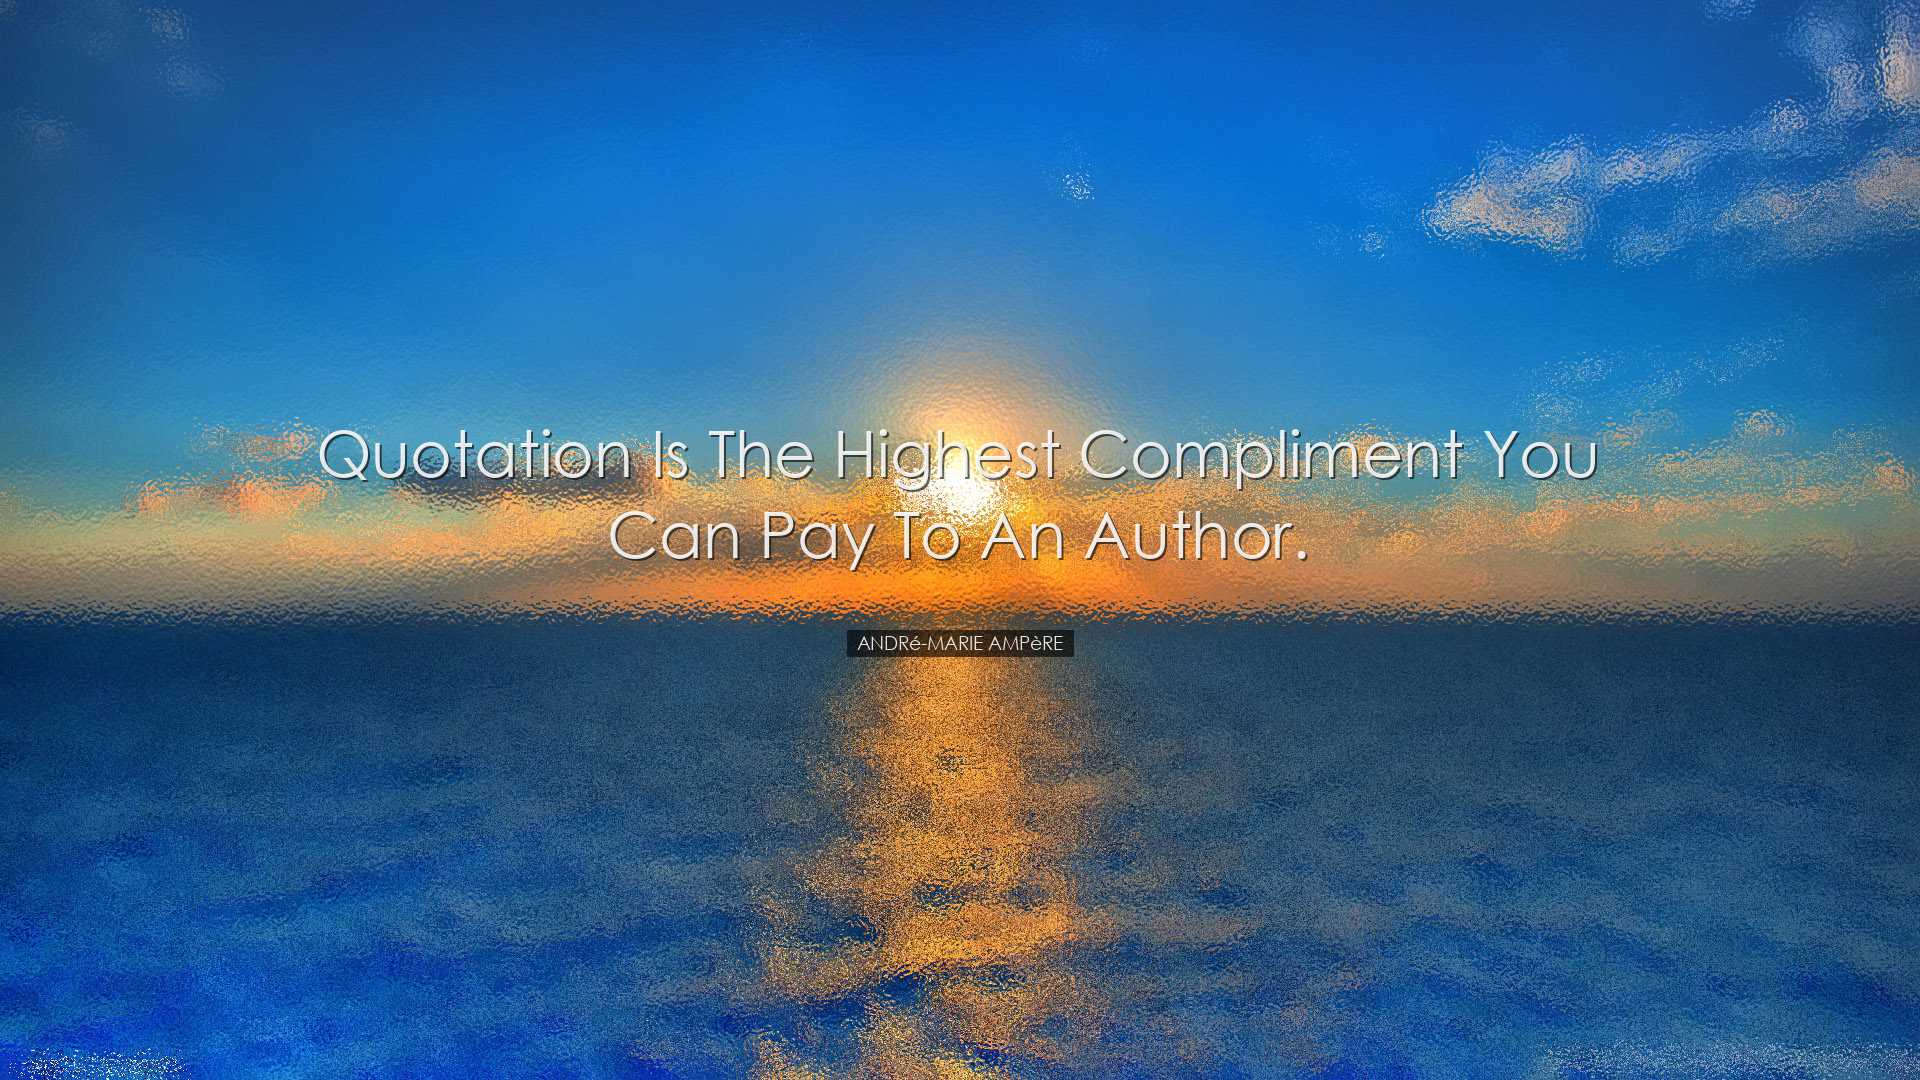 Quotation is the highest compliment you can pay to an author. - An